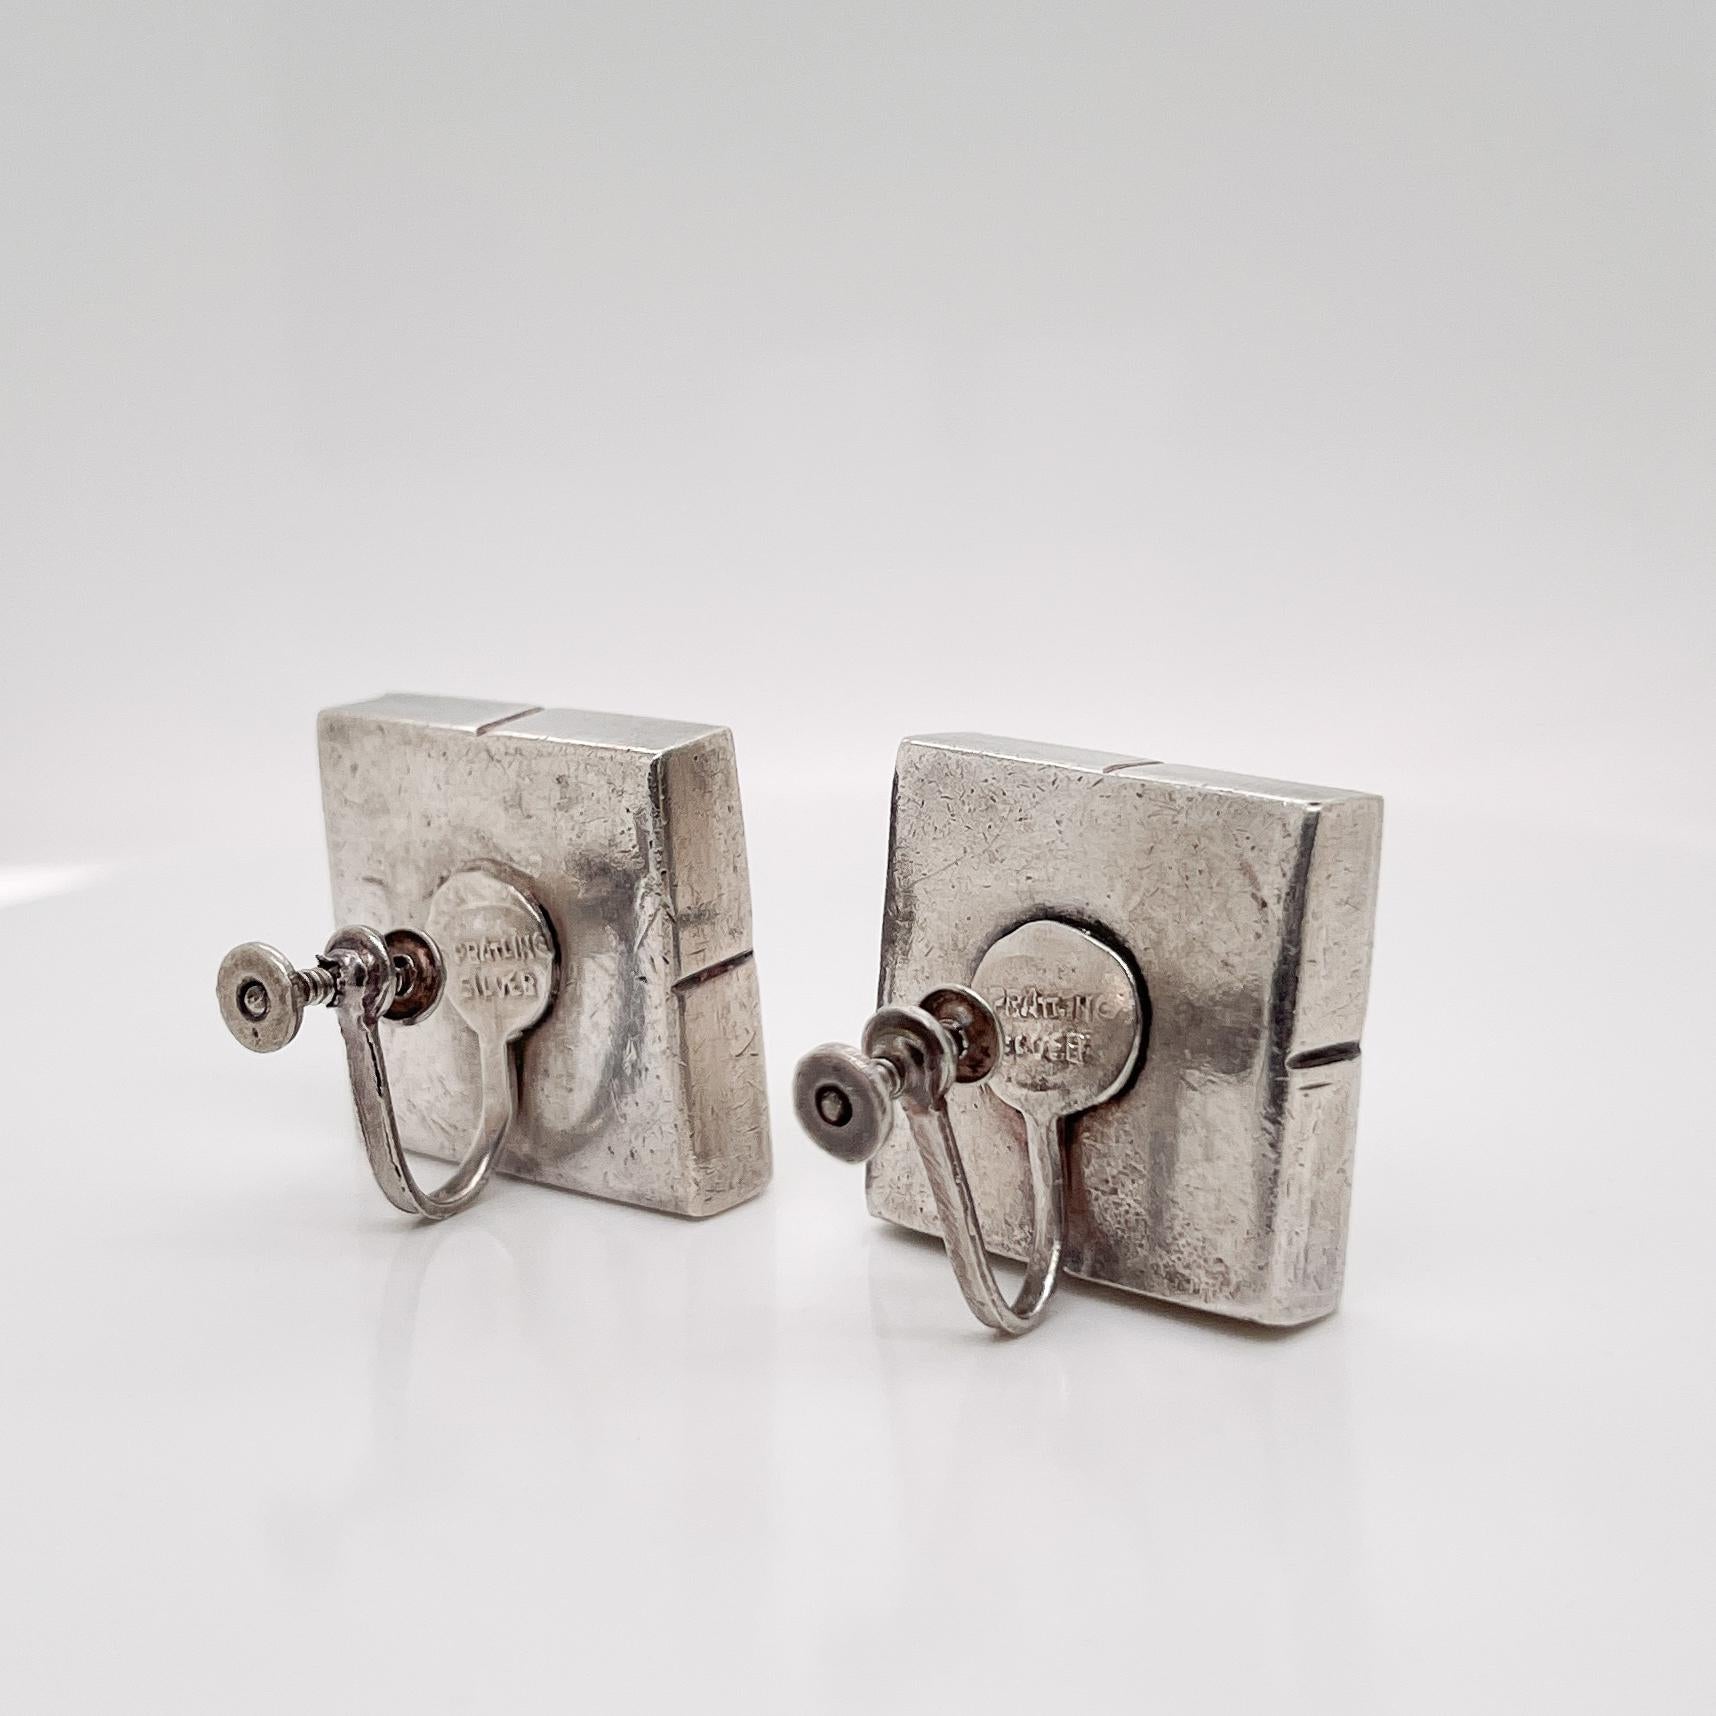 Vintage Mexican William Spratling Silver Modernist Square Cube Earrings & Brooch For Sale 1